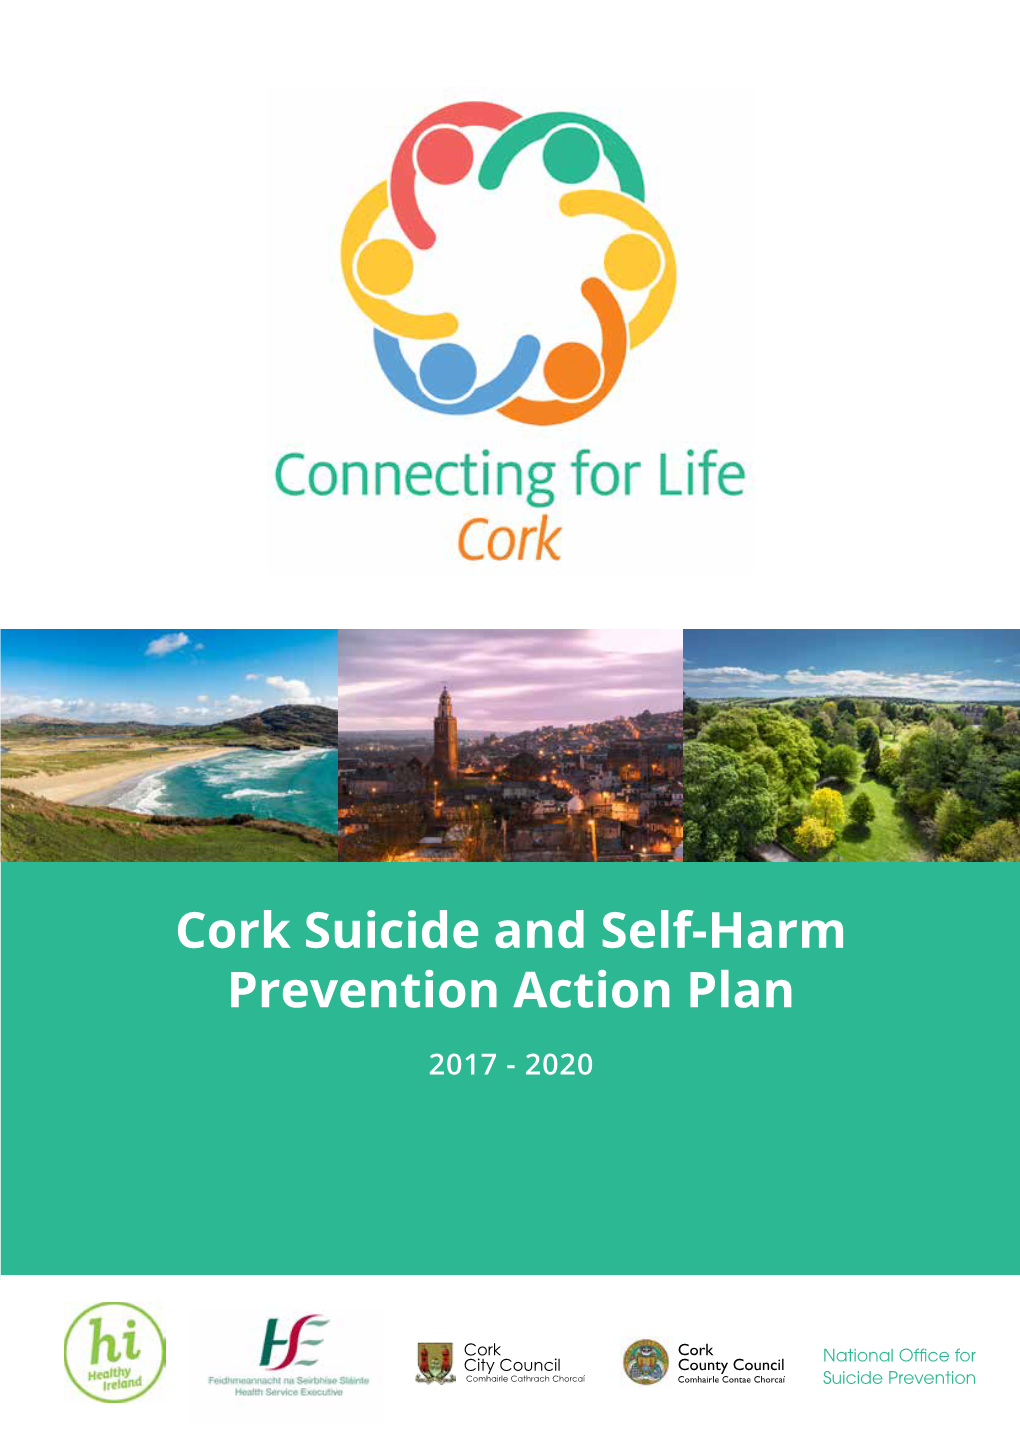 Cork Suicide and Self-Harm Prevention Action Plan